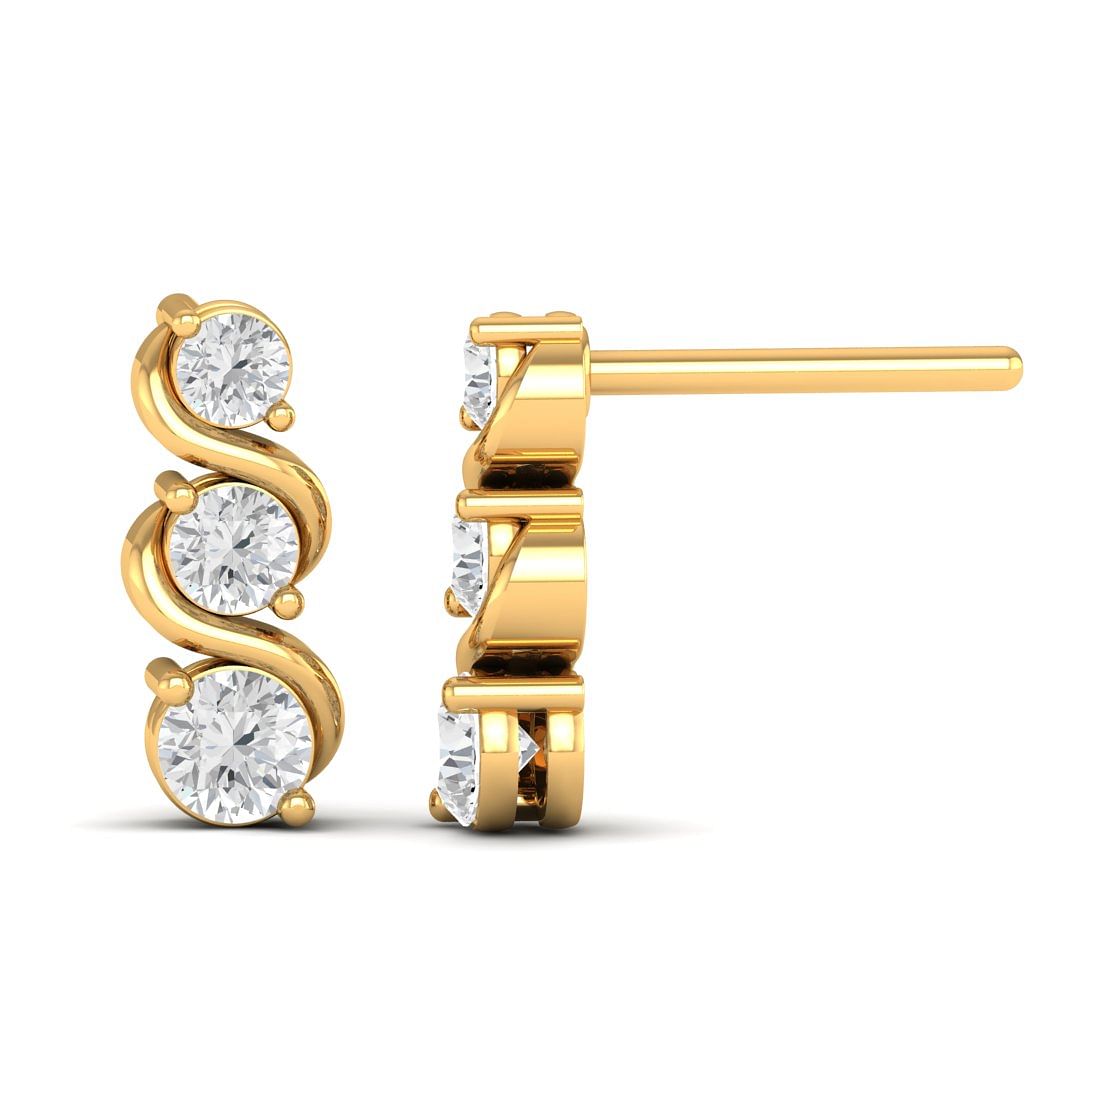 Chavvi Drop Yellow Gold Diamond Earrings For Bridal Gift